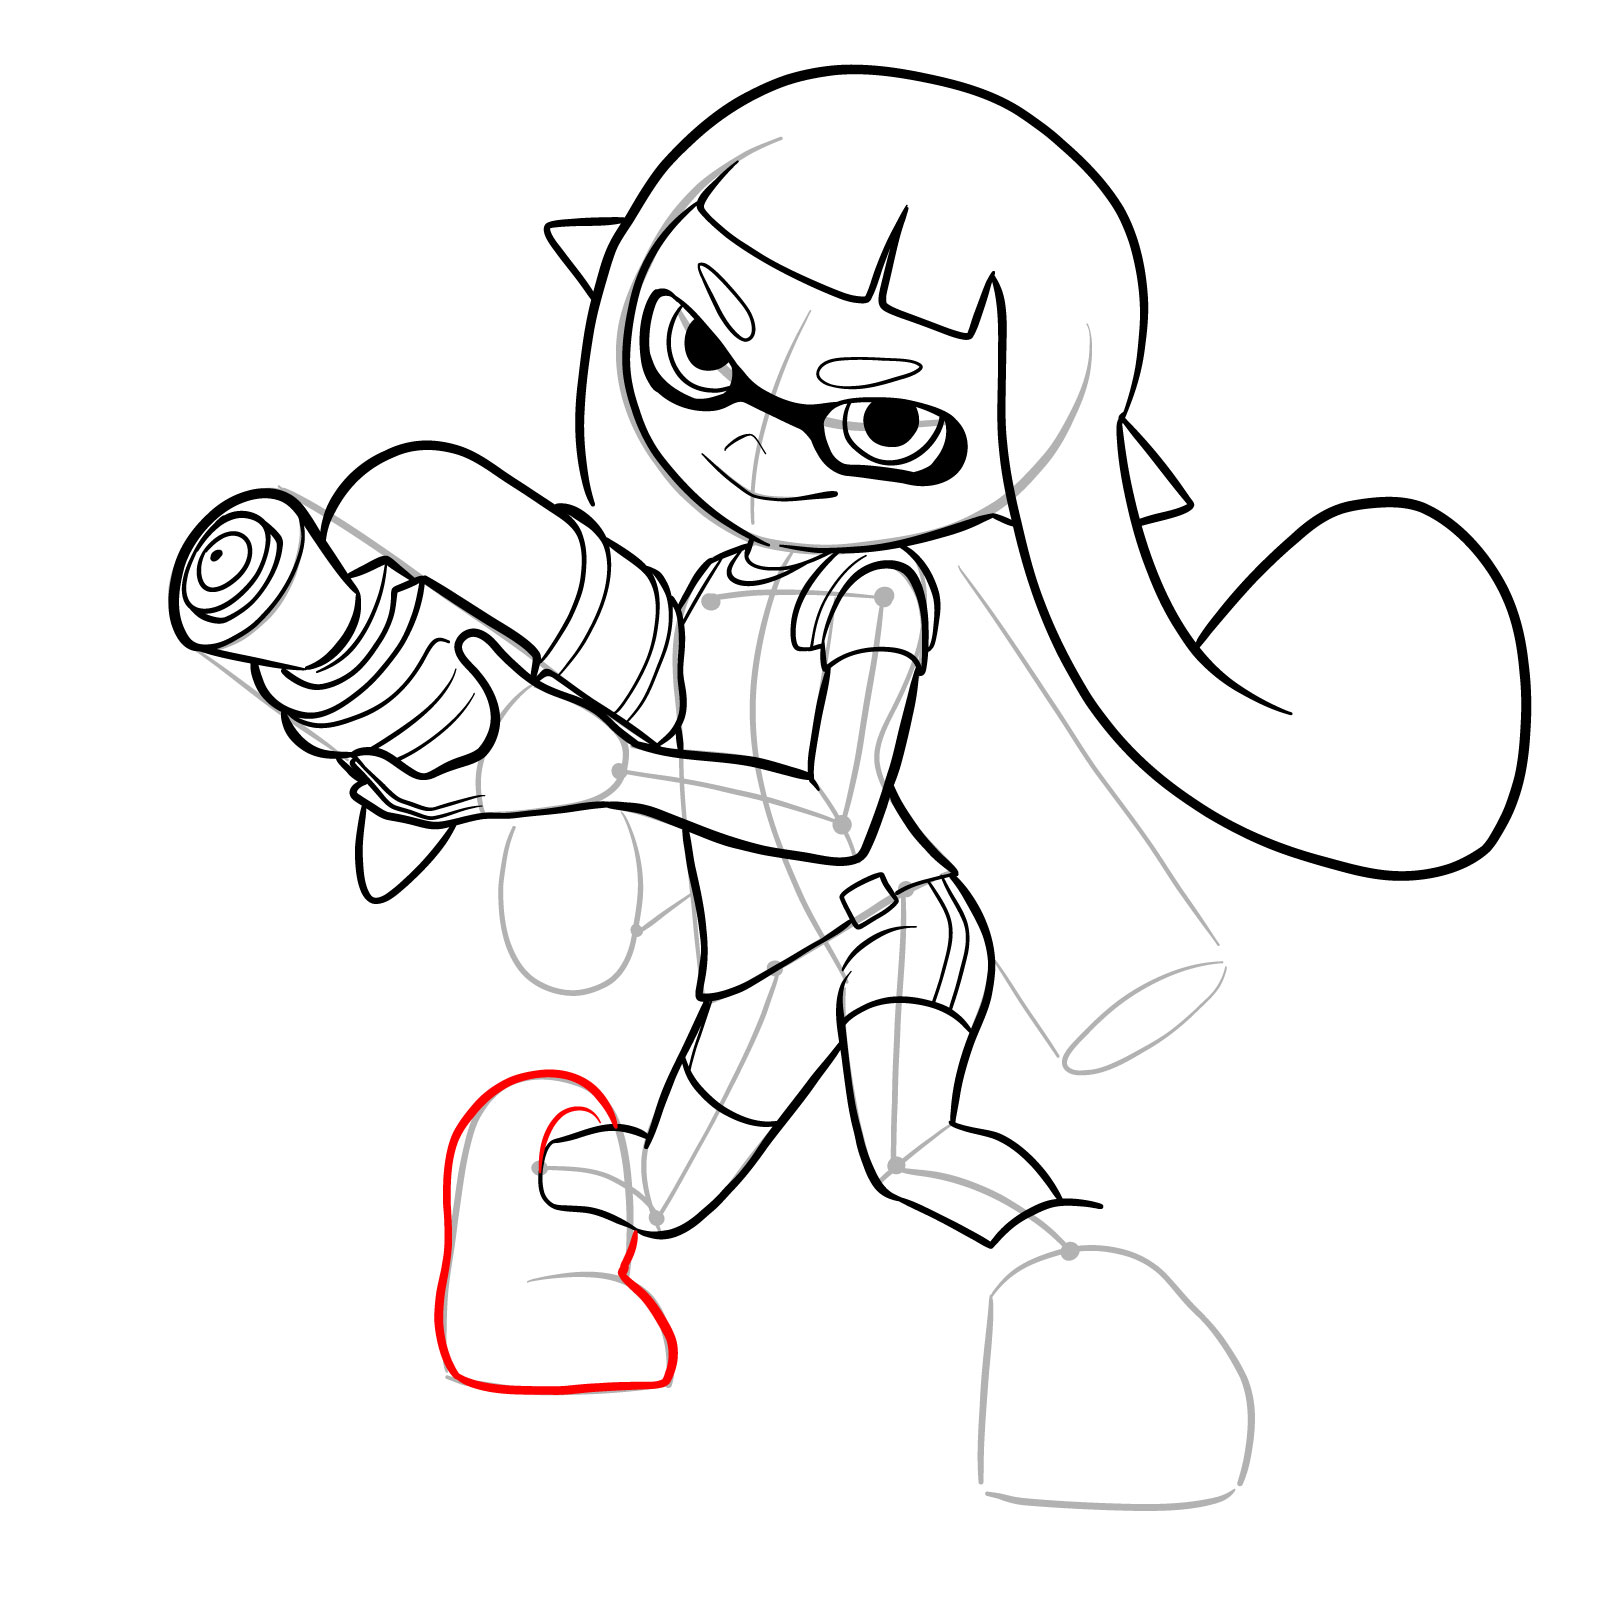 How to draw an Inkling Girl - step 25